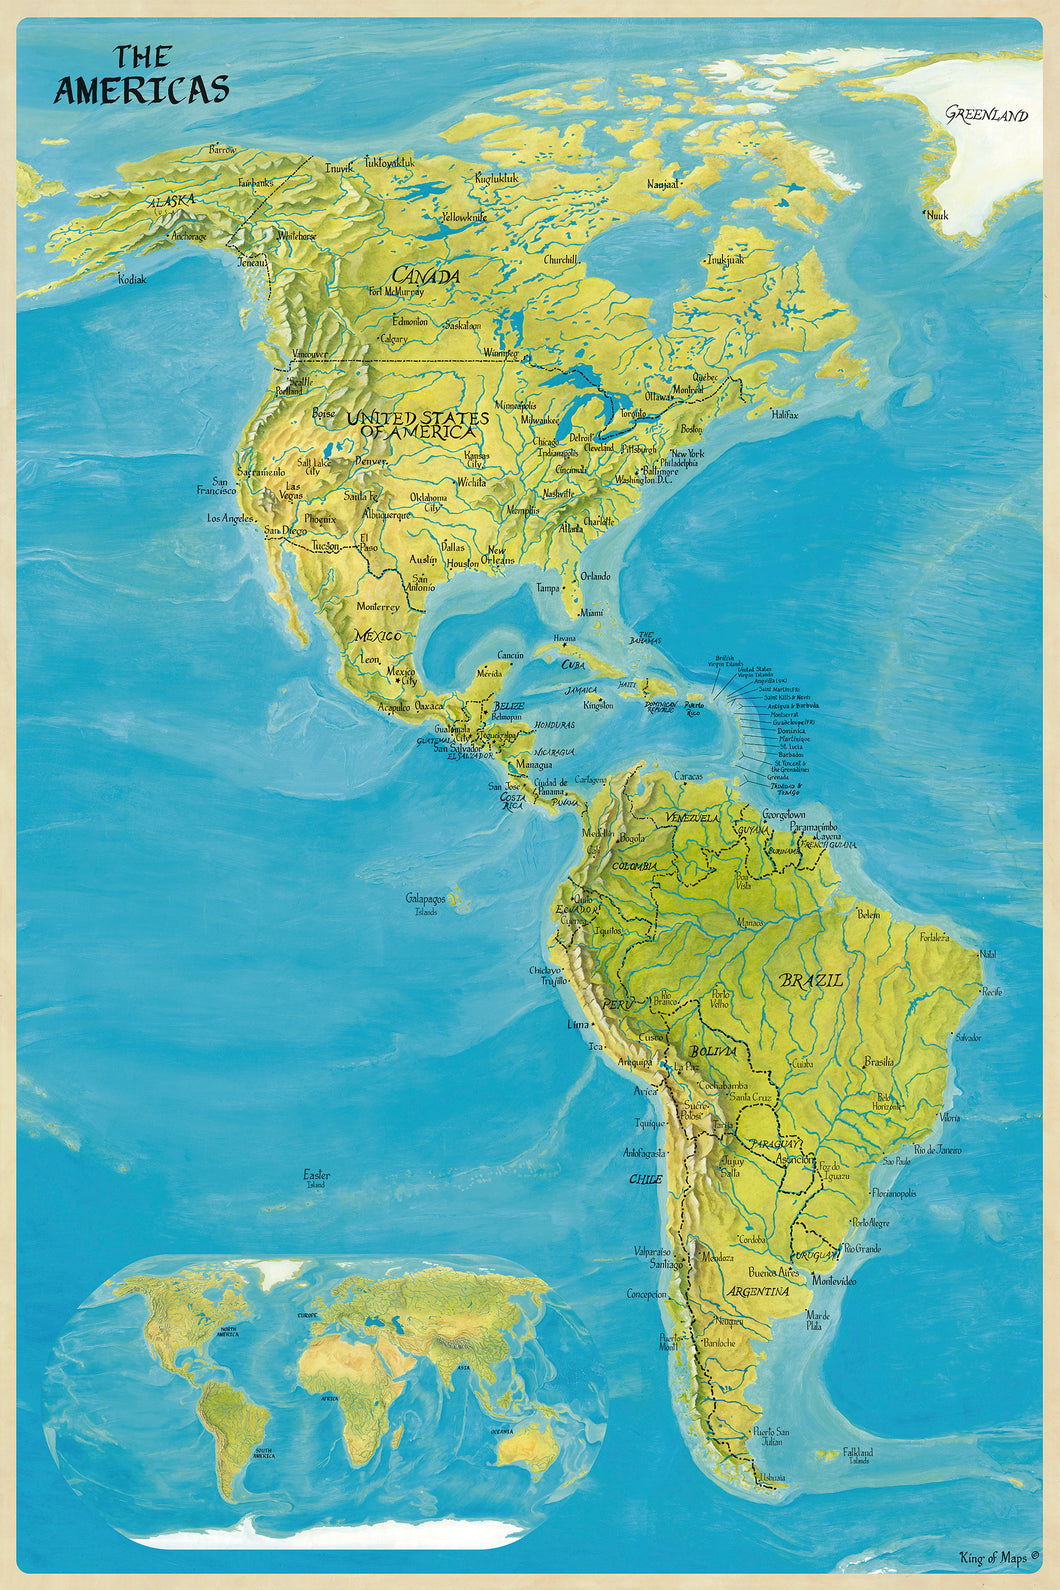 PAINTED AMERICAS MAP - beautifully painted rendition of the Americas .